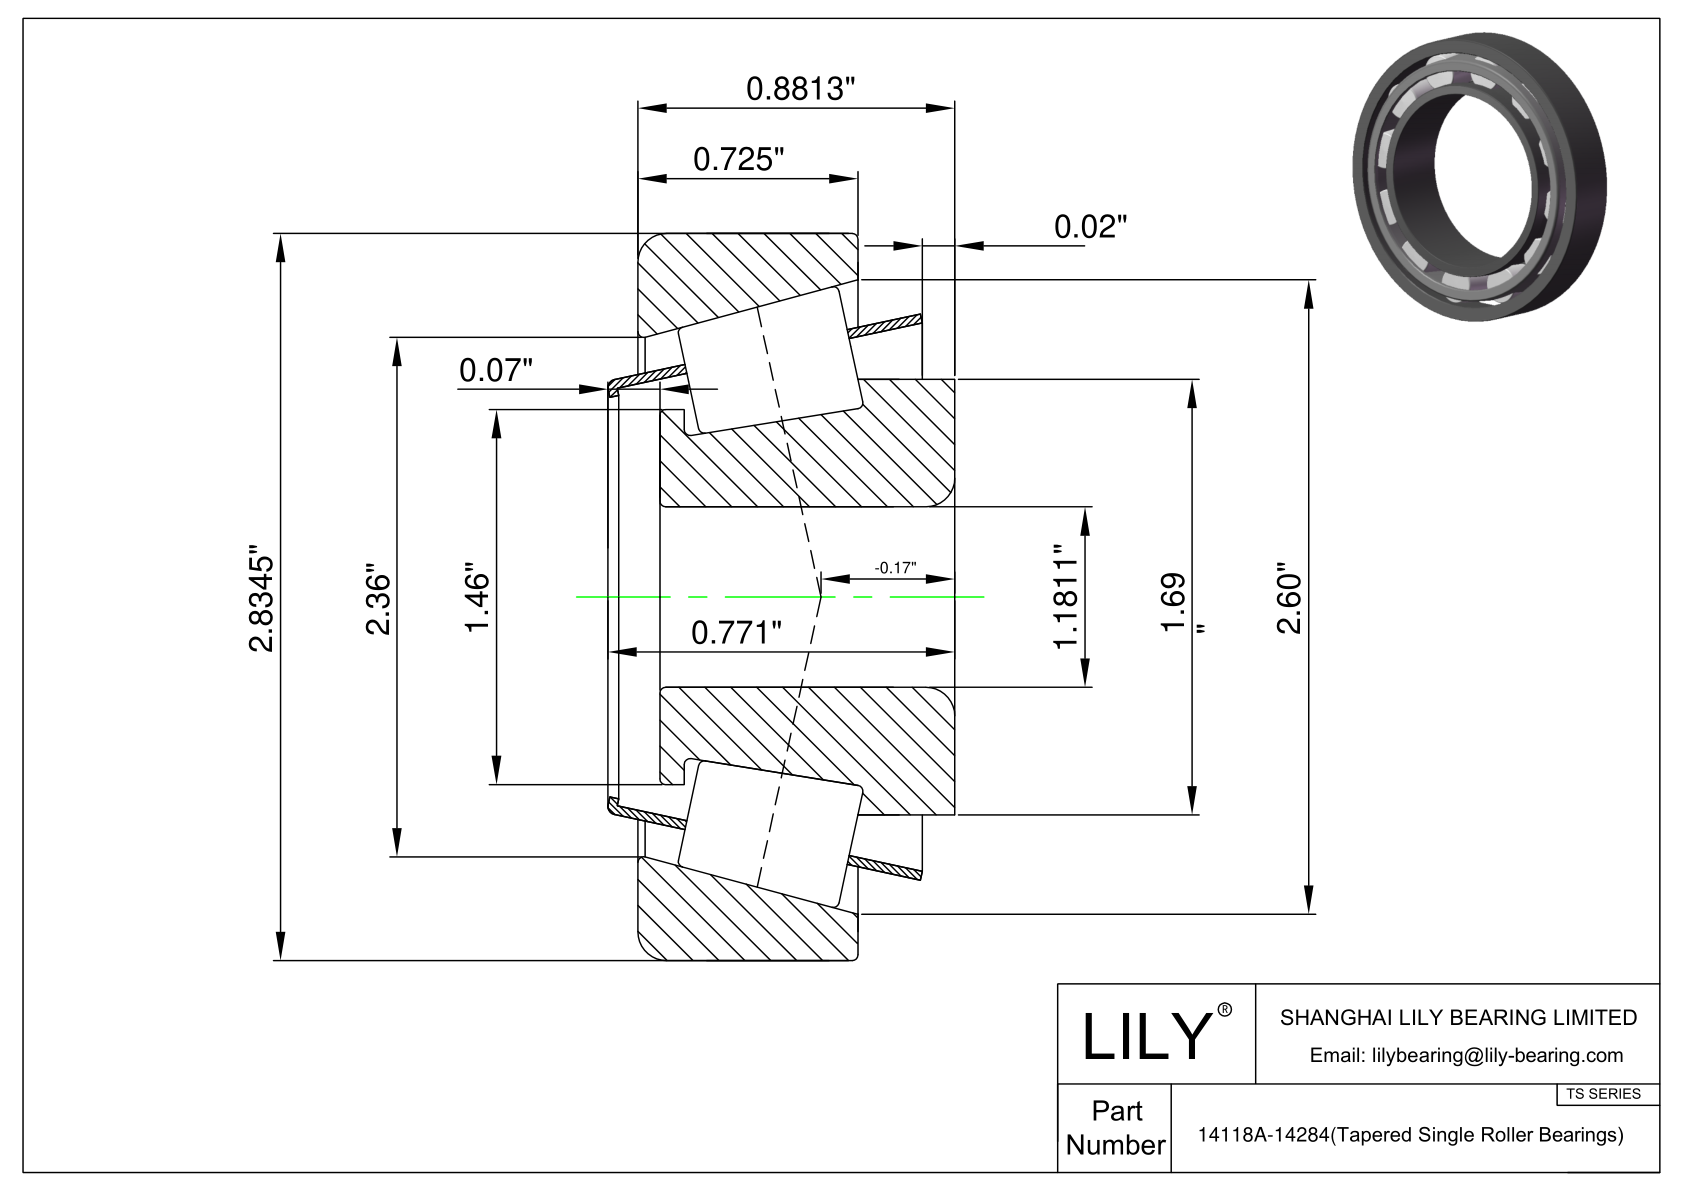 14118A-14284 TS (Tapered Single Roller Bearings) (Imperial) cad drawing